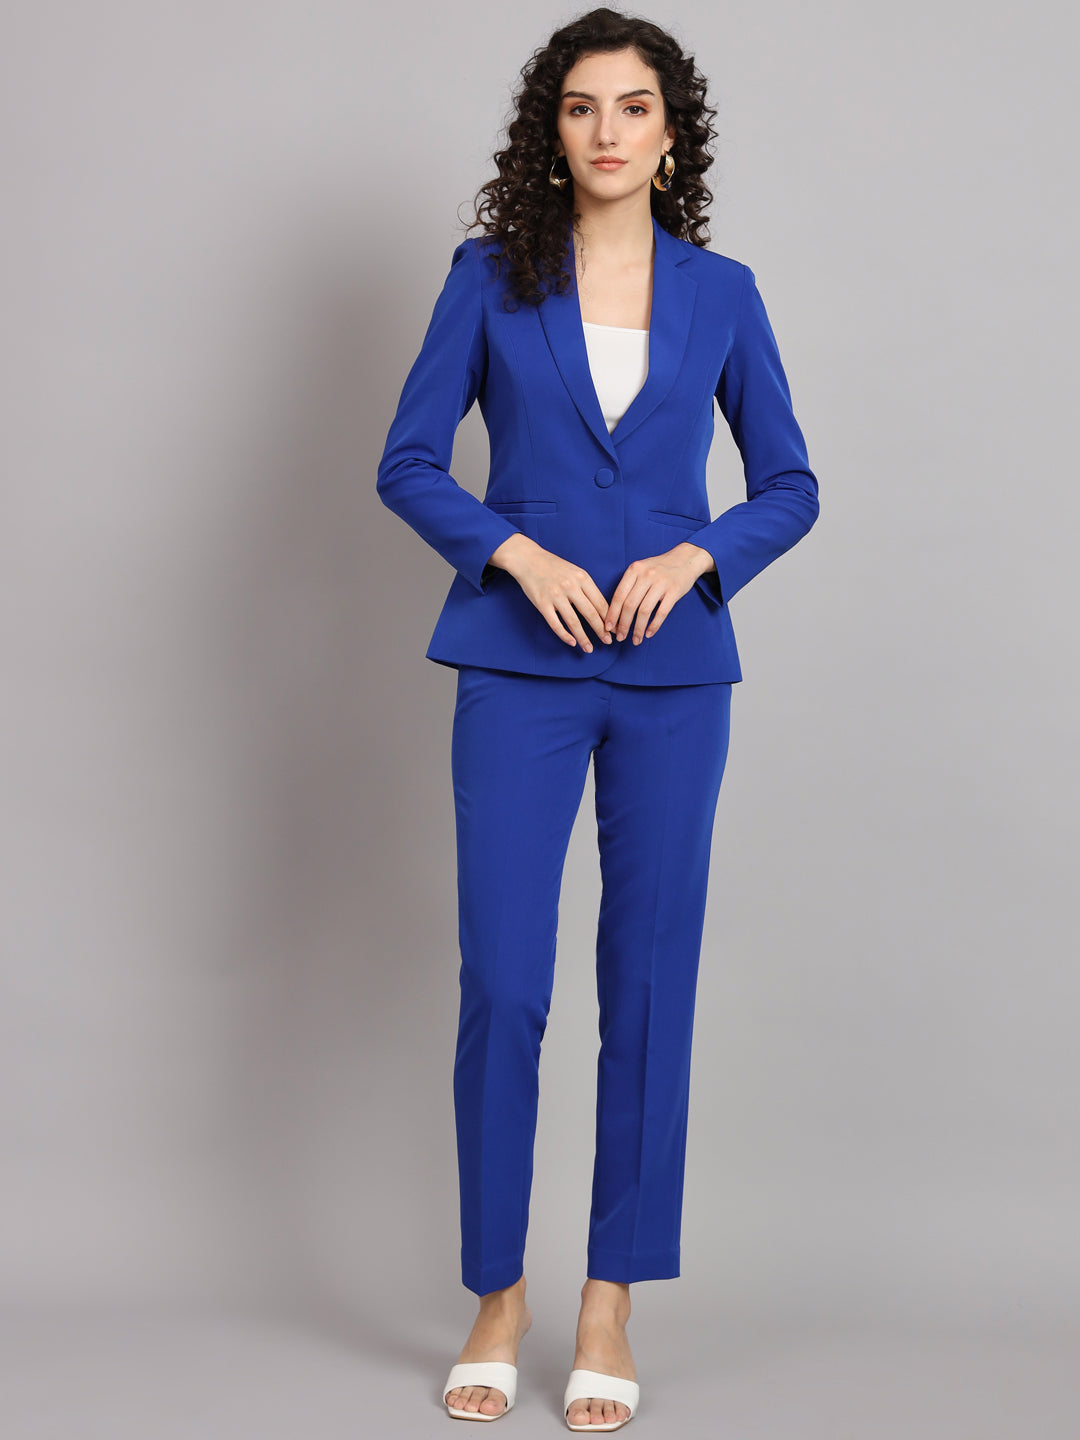 Ink Blue Polyester Notch Collar Stretch Pant Suit